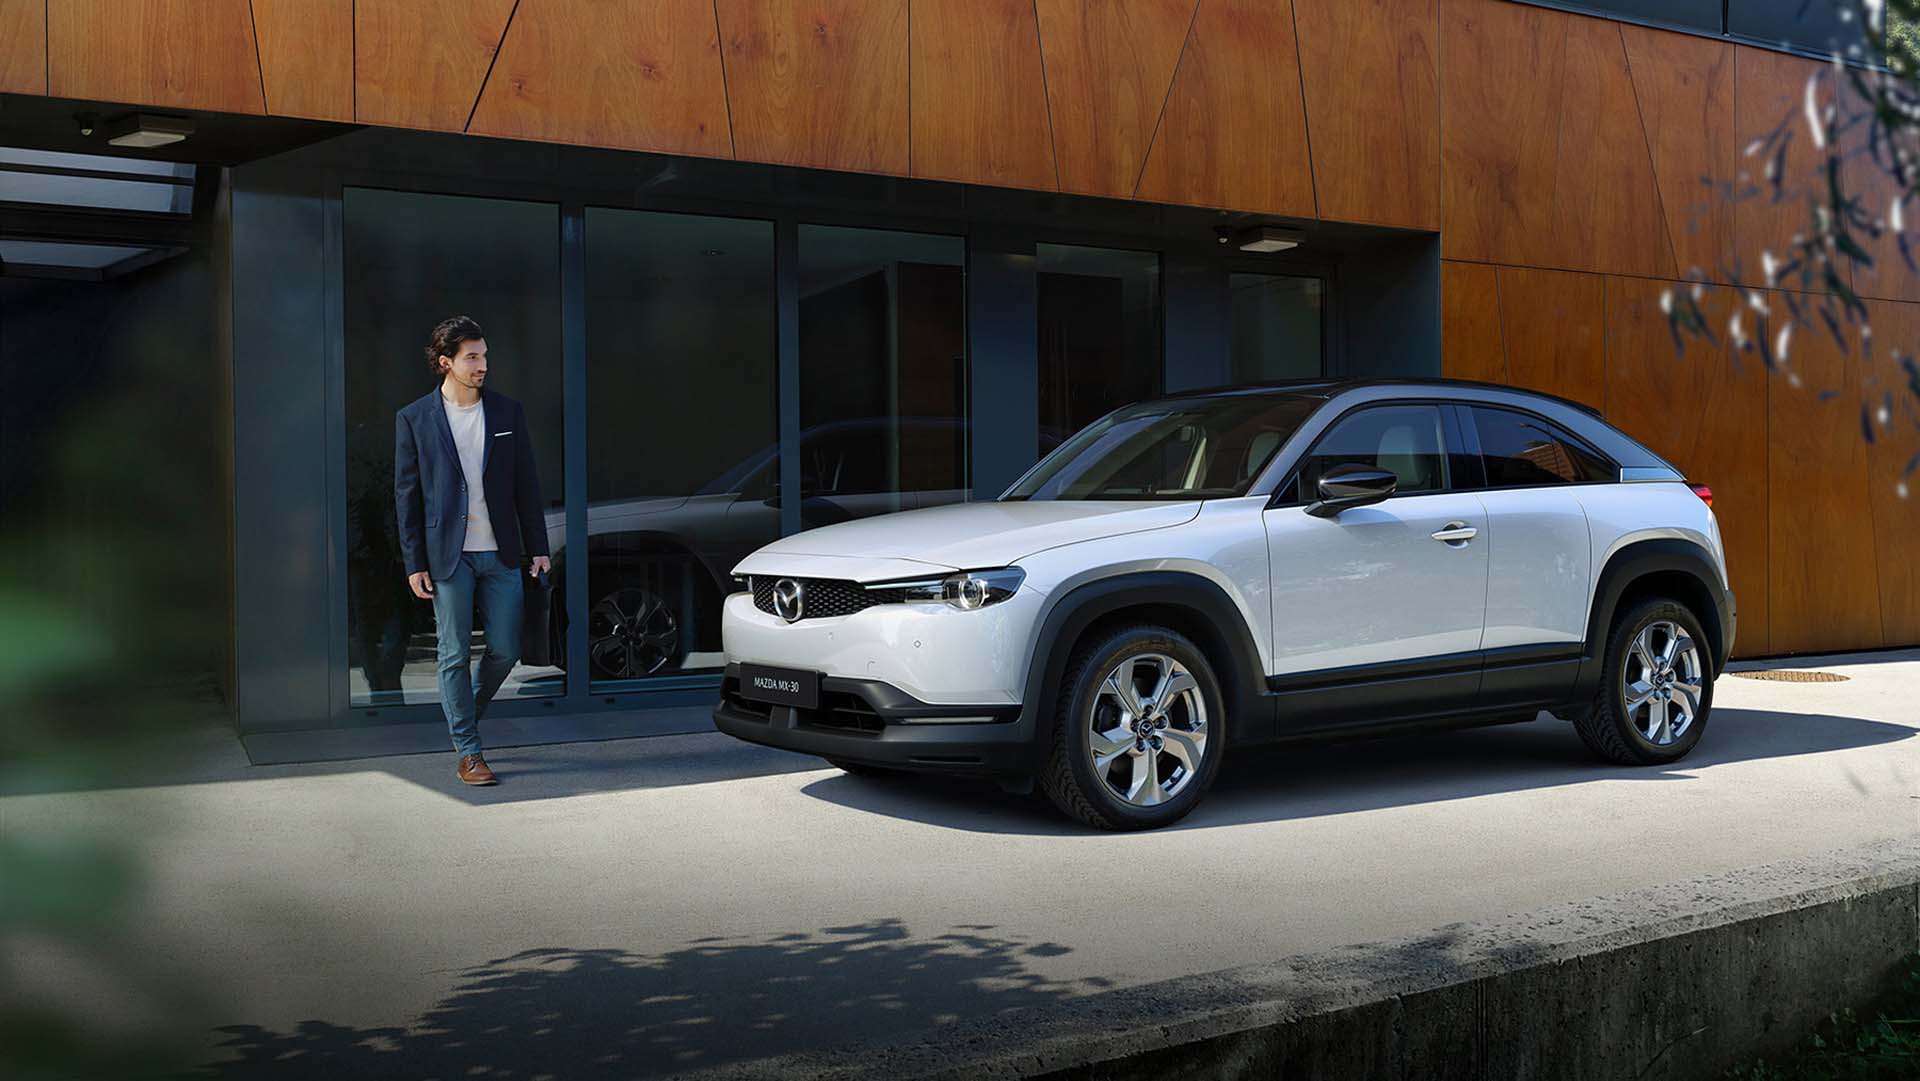 Preview: 2022 Mazda MX-30 electric crossover priced from $34,645, limited  to California